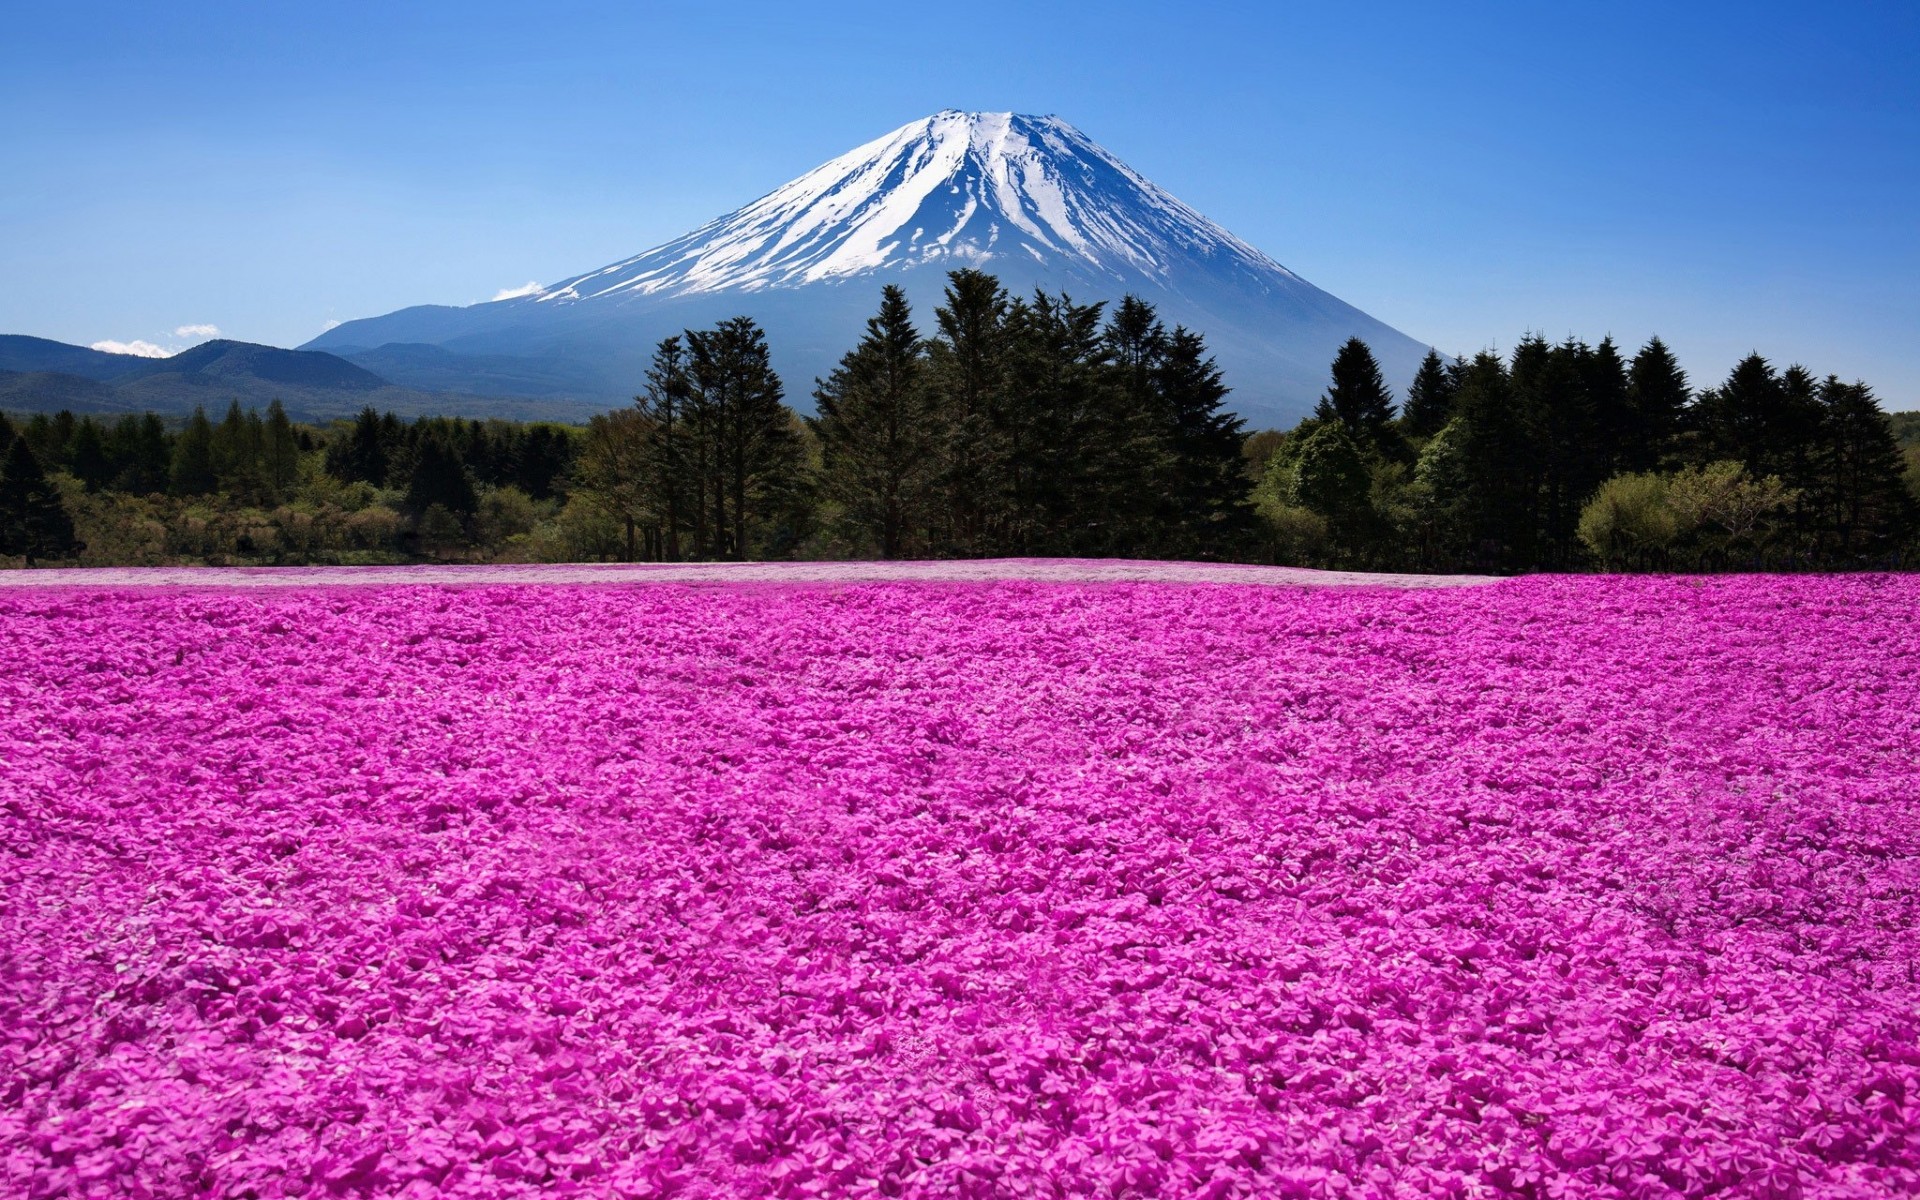 General 1920x1200 nature landscape mountains trees clouds Mount Fuji Japan flowers field pink plants Asia volcano